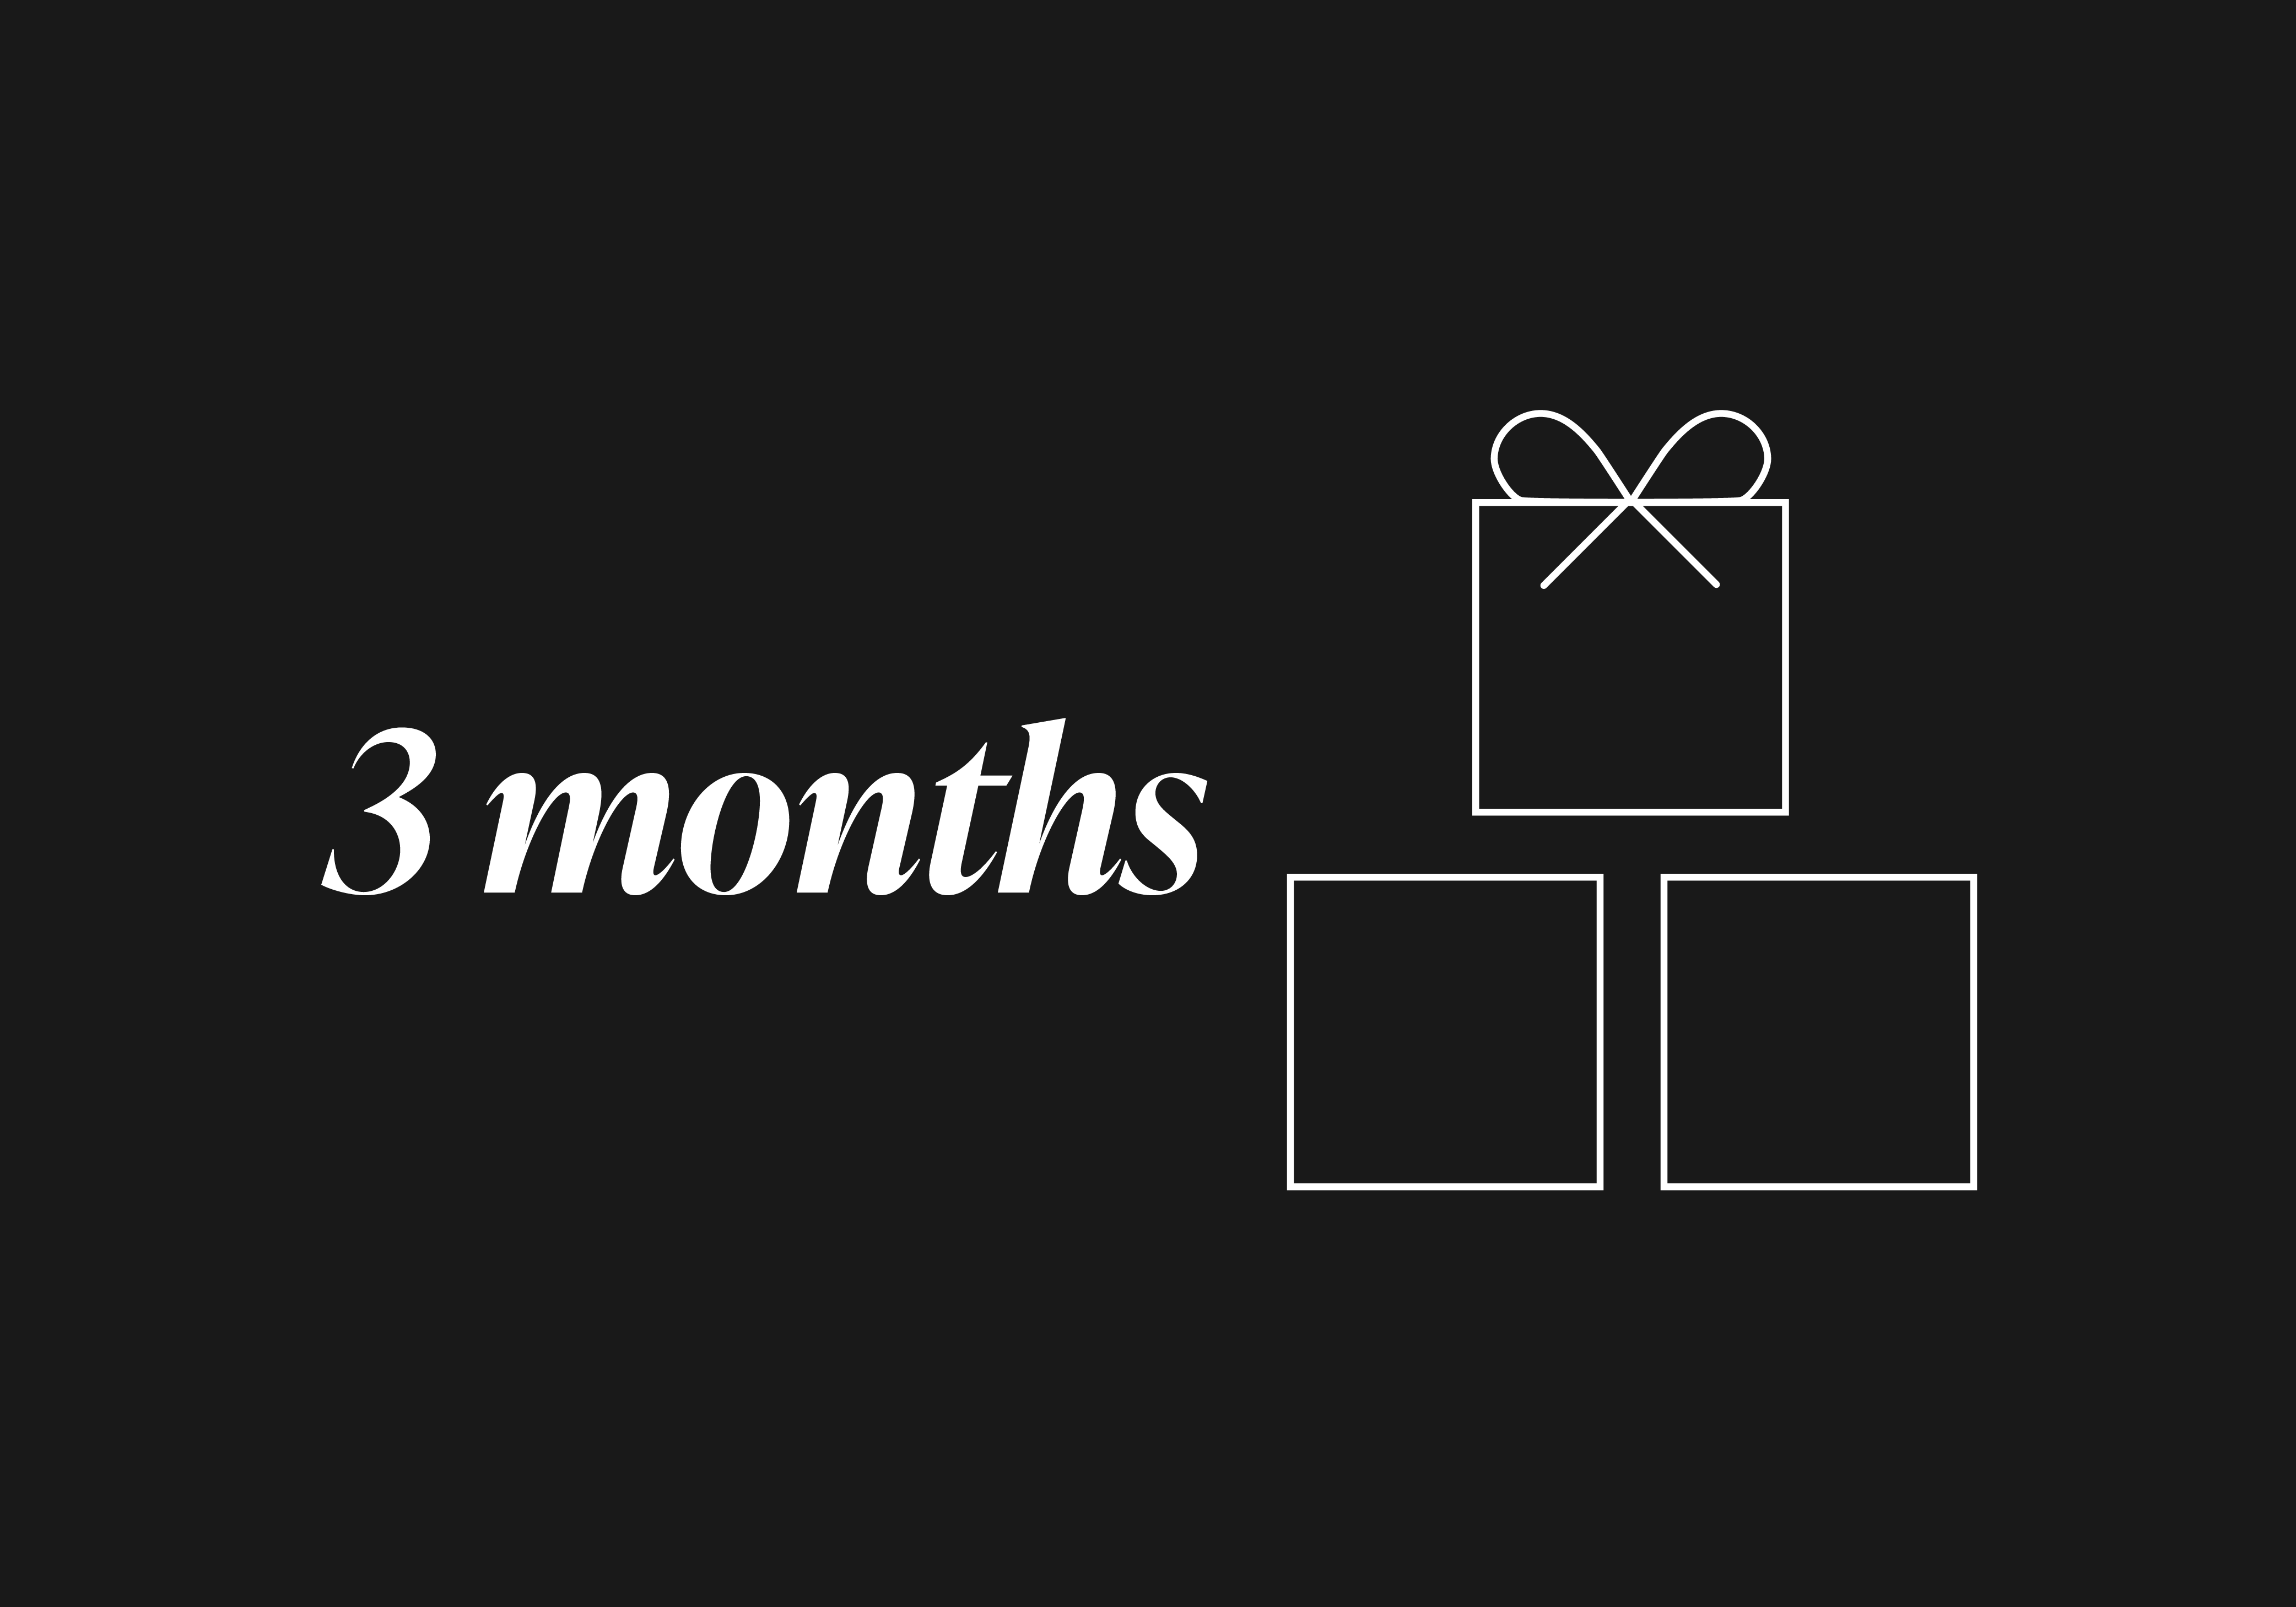 a graphic representing our 3 months option.  The graphic has text that reads 3 months and has an illustration of a three gift boxes.